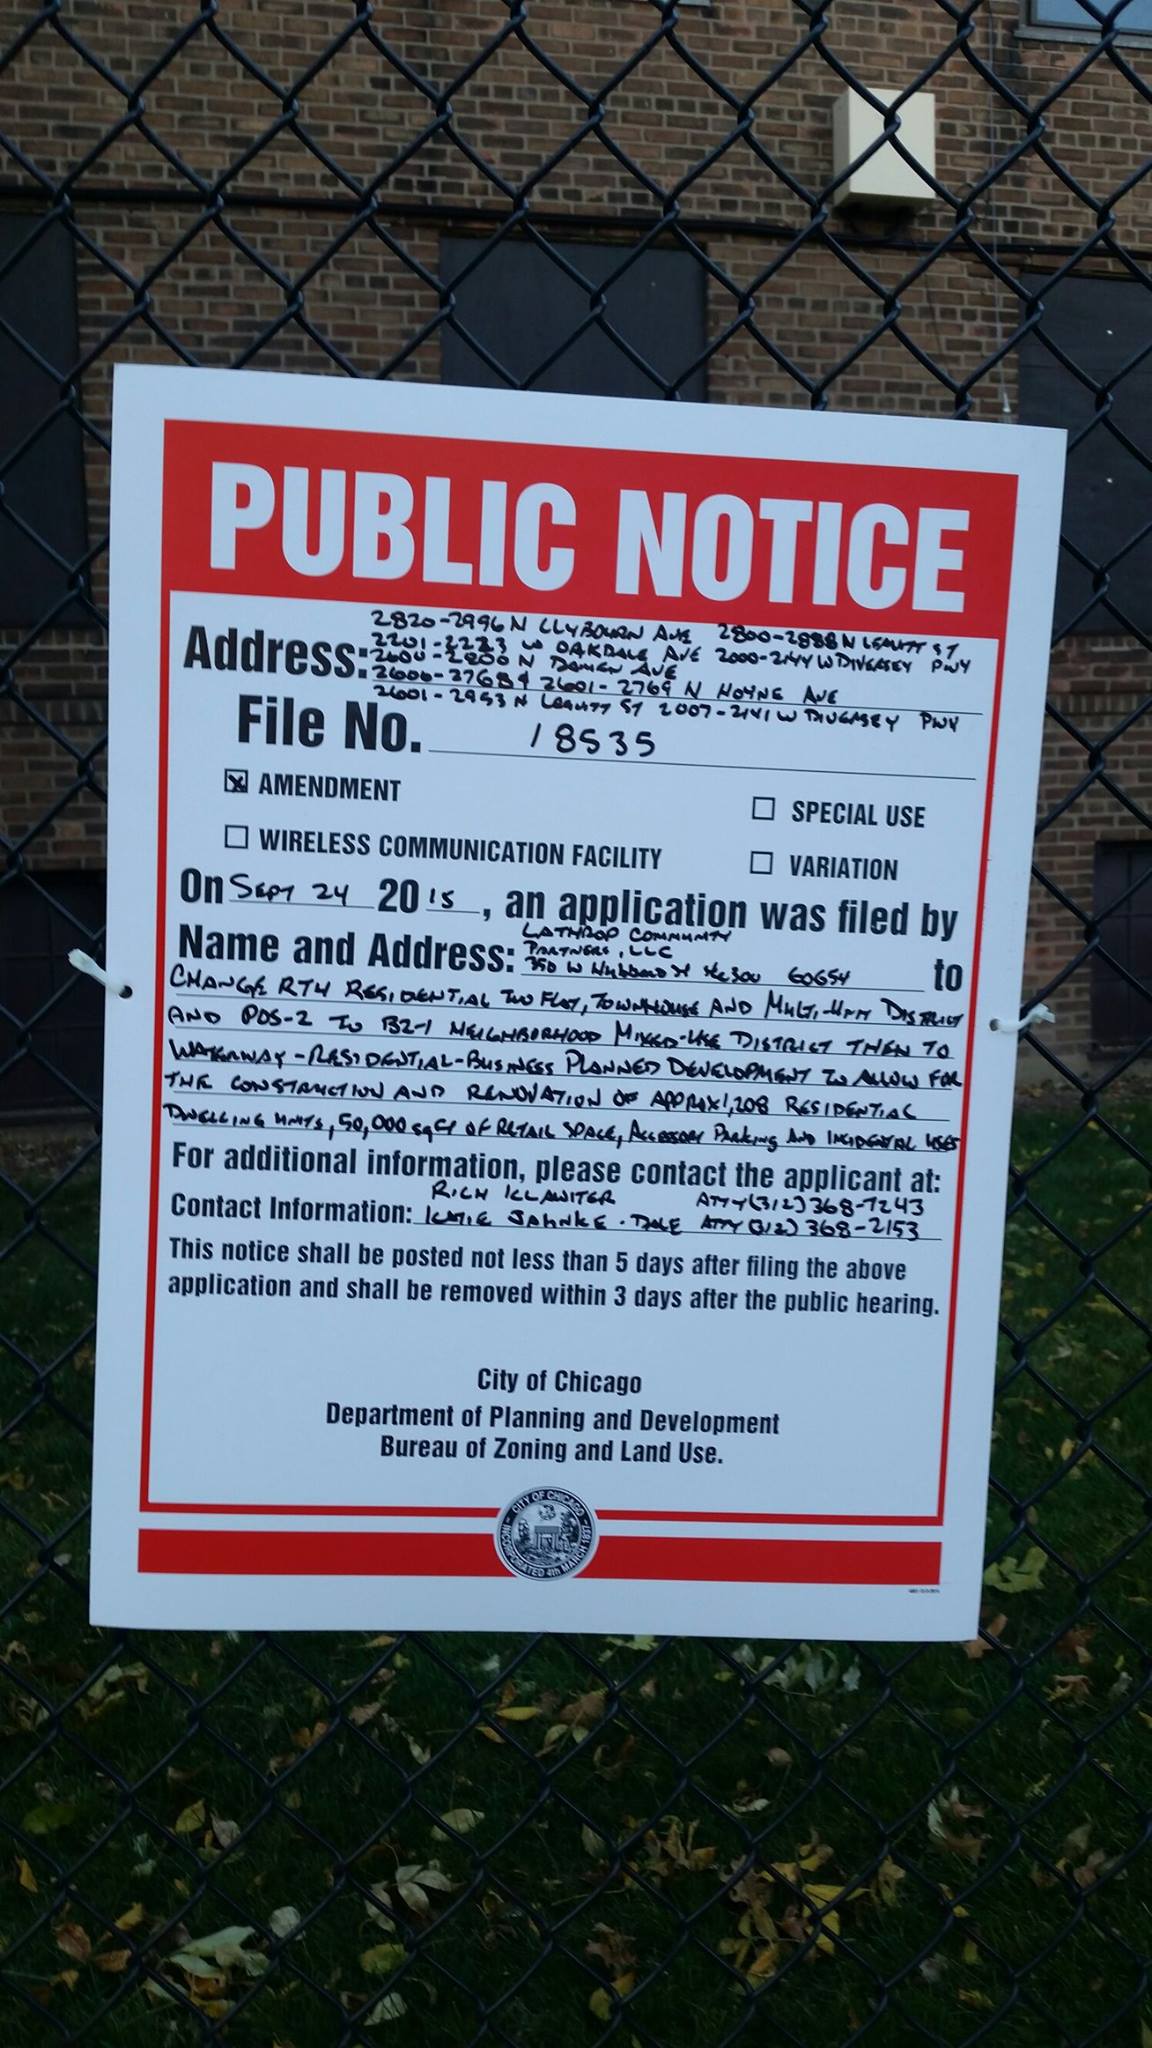 A close up of public notice of an intent to file a zoning change for Lathrop Homes in Chicago, attached to a wire fence